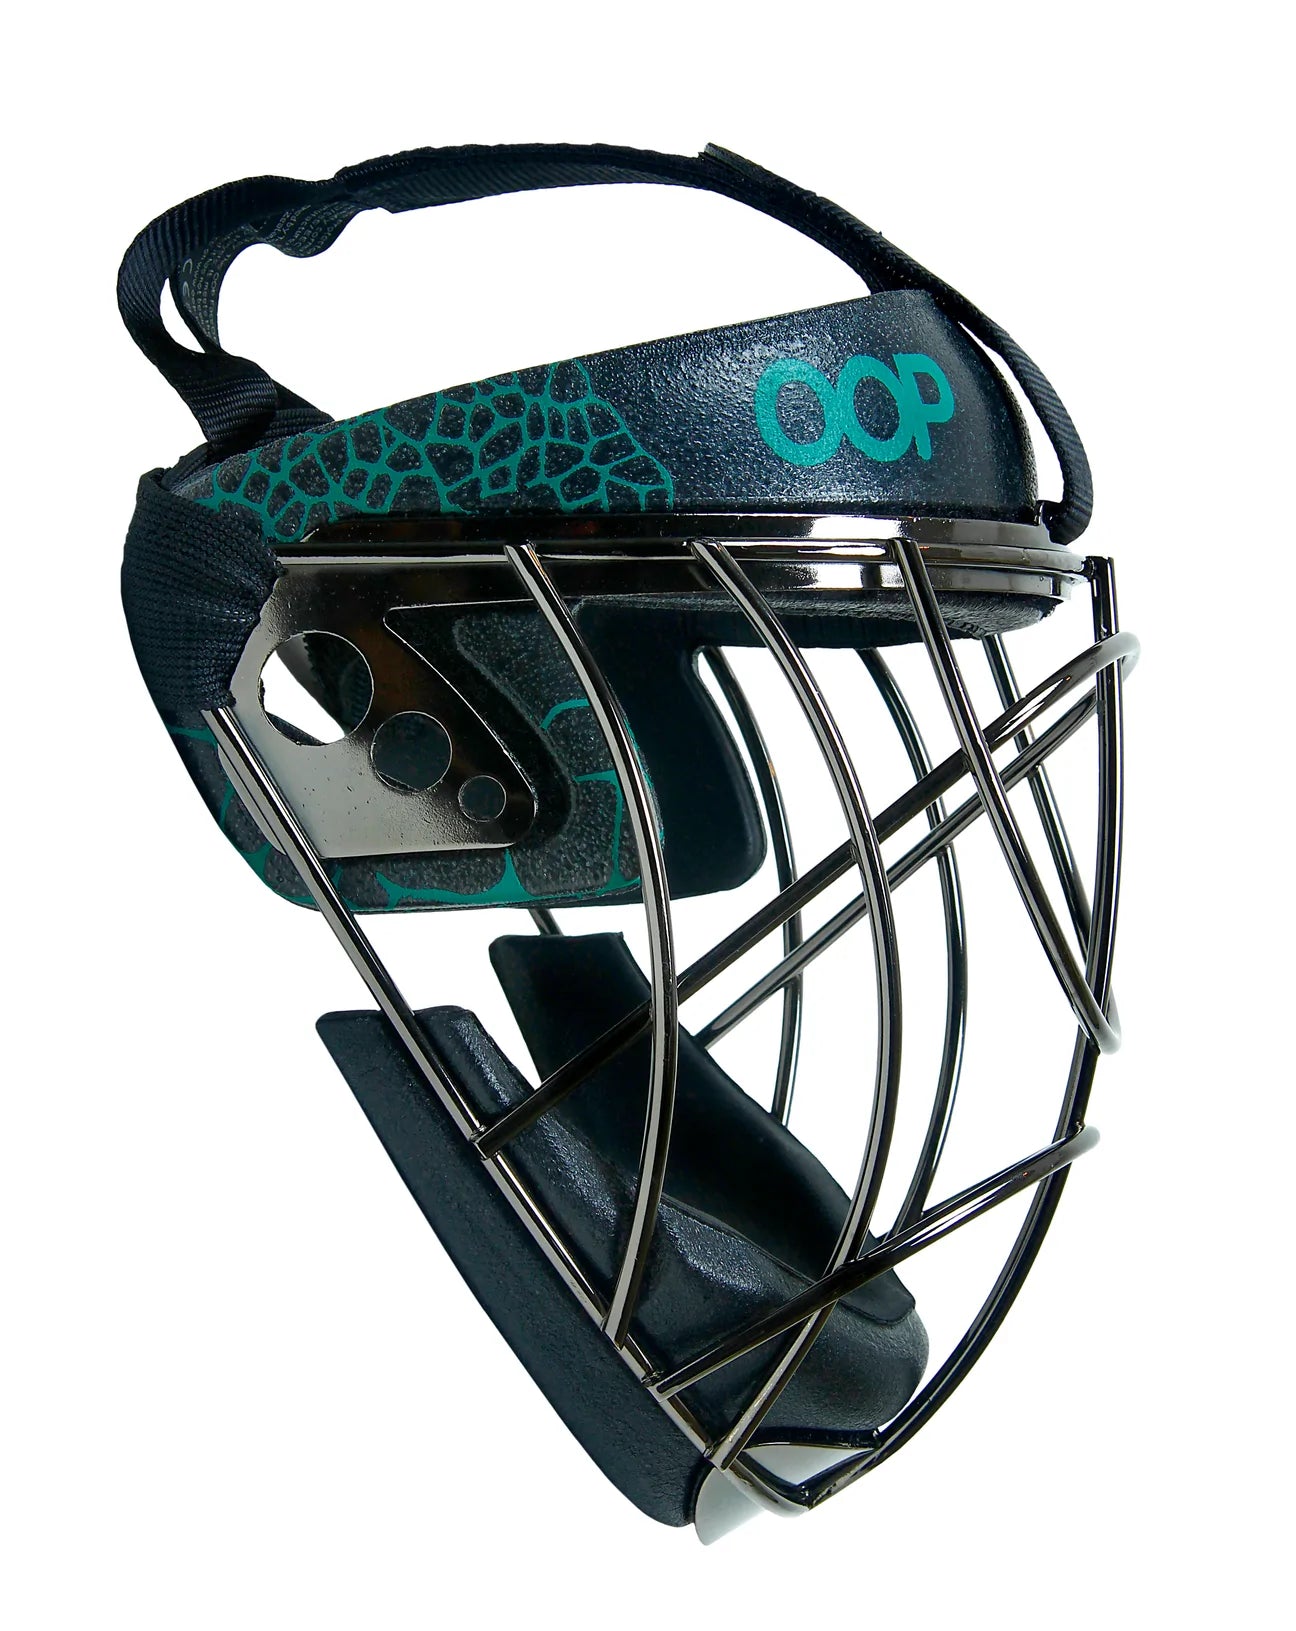 OOP Face Off Steel PC Face Mask